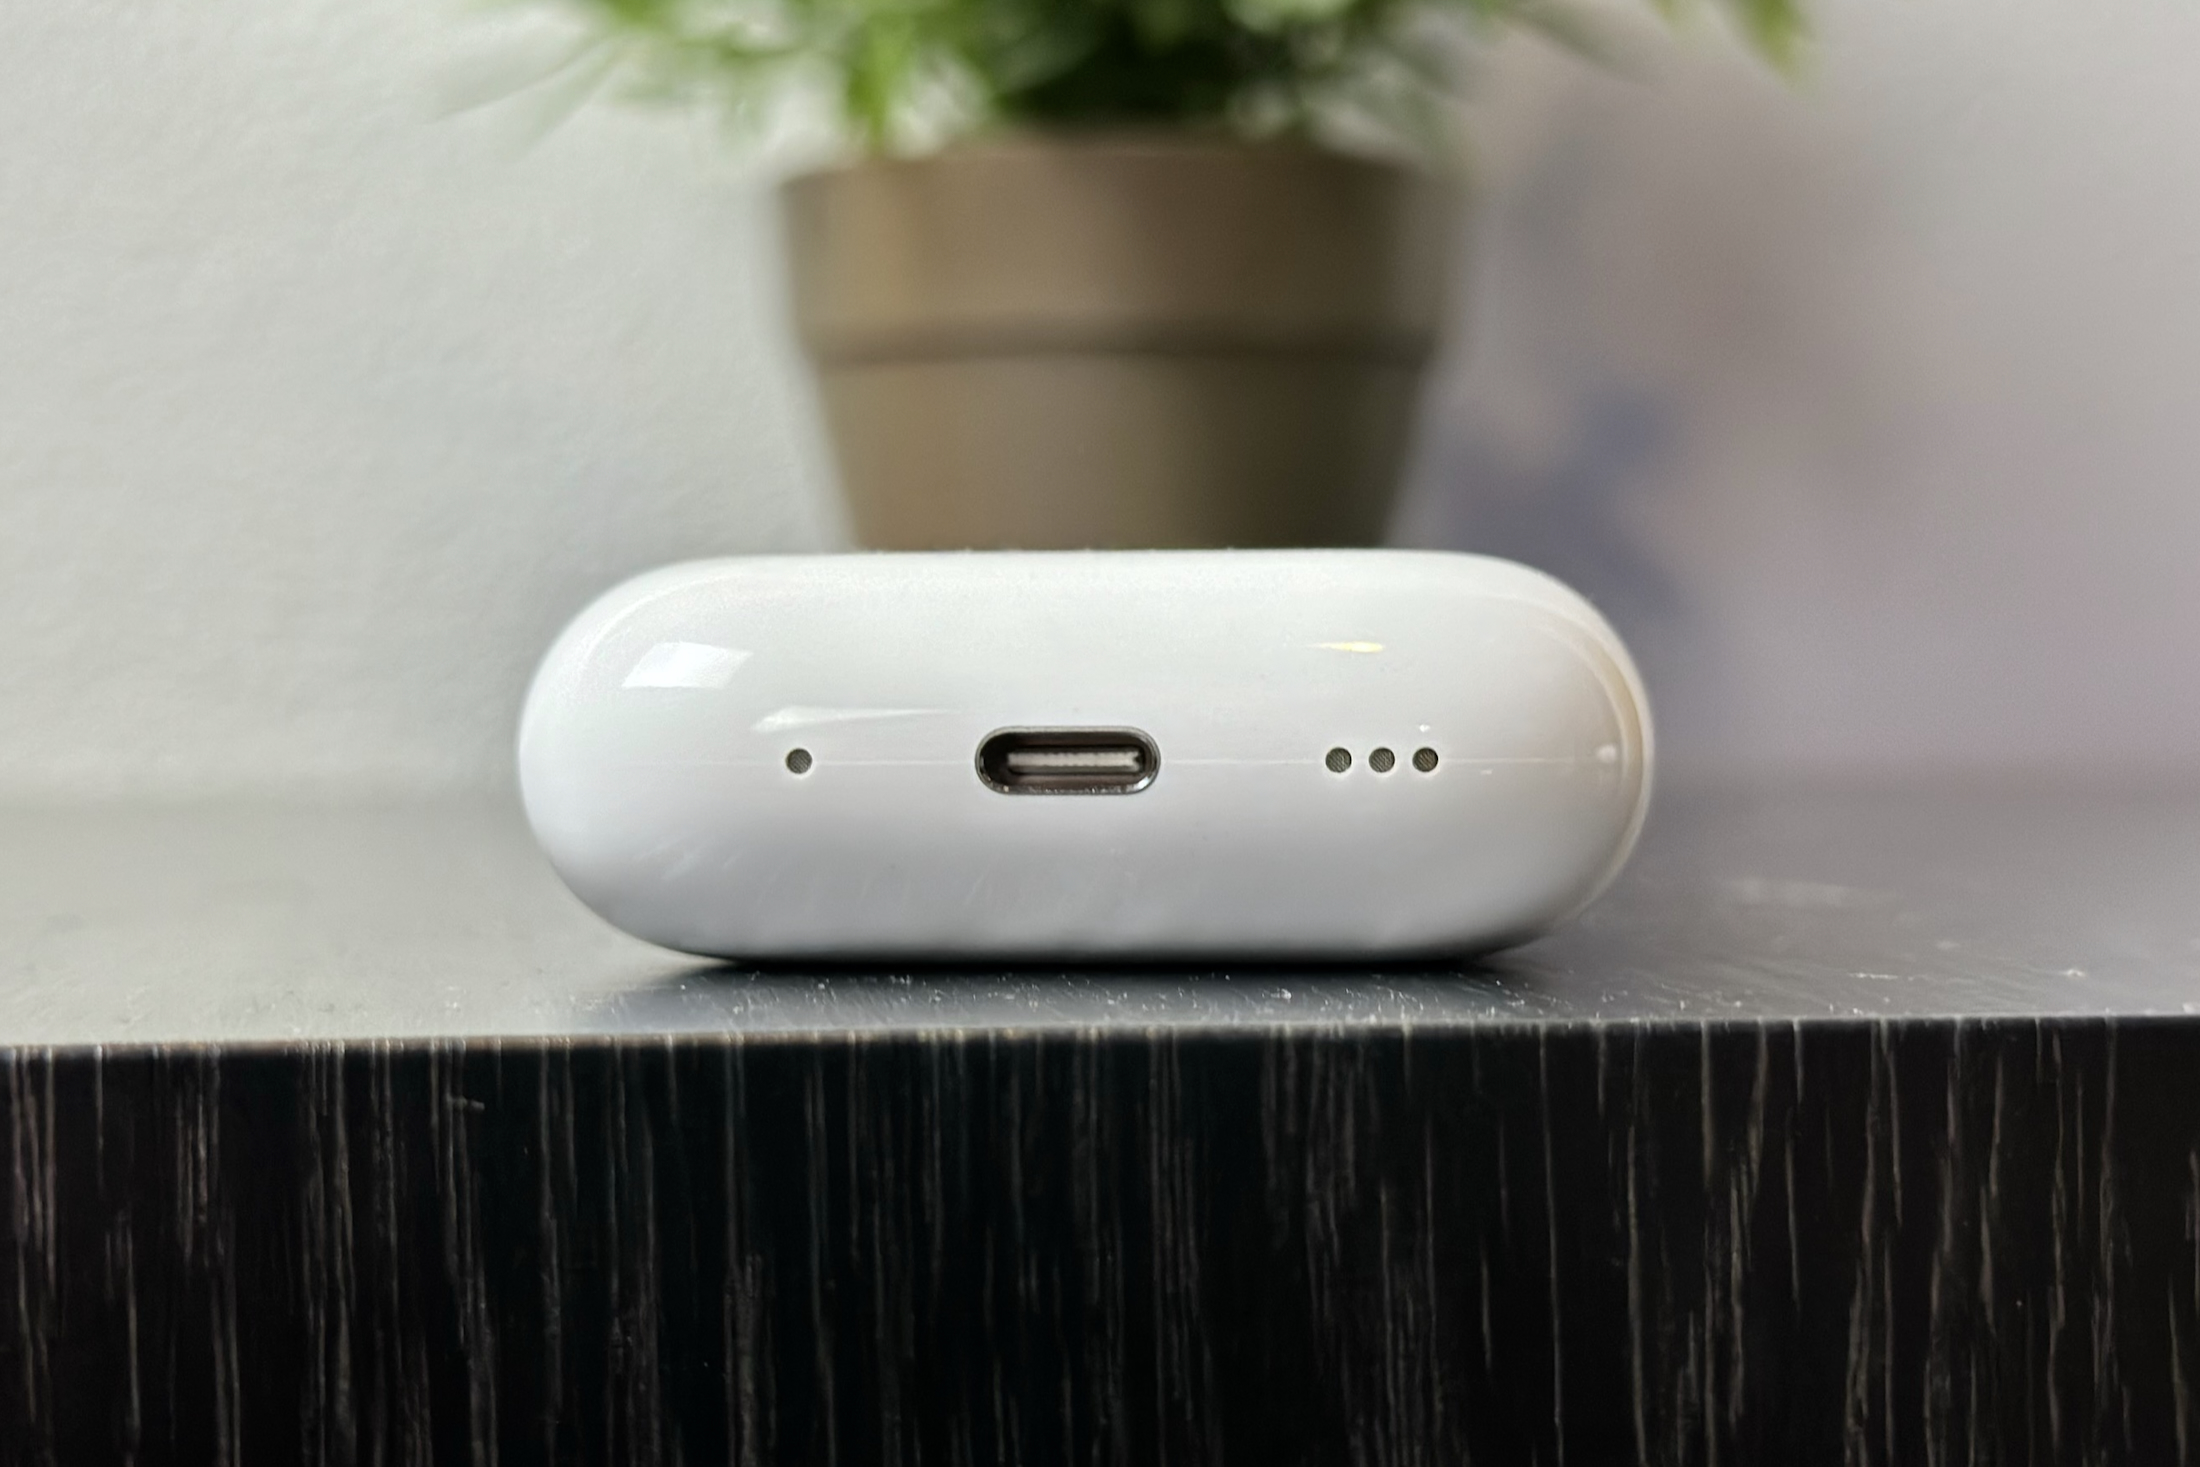 Second generation Apple AirPods Pro charging case with USB-C.